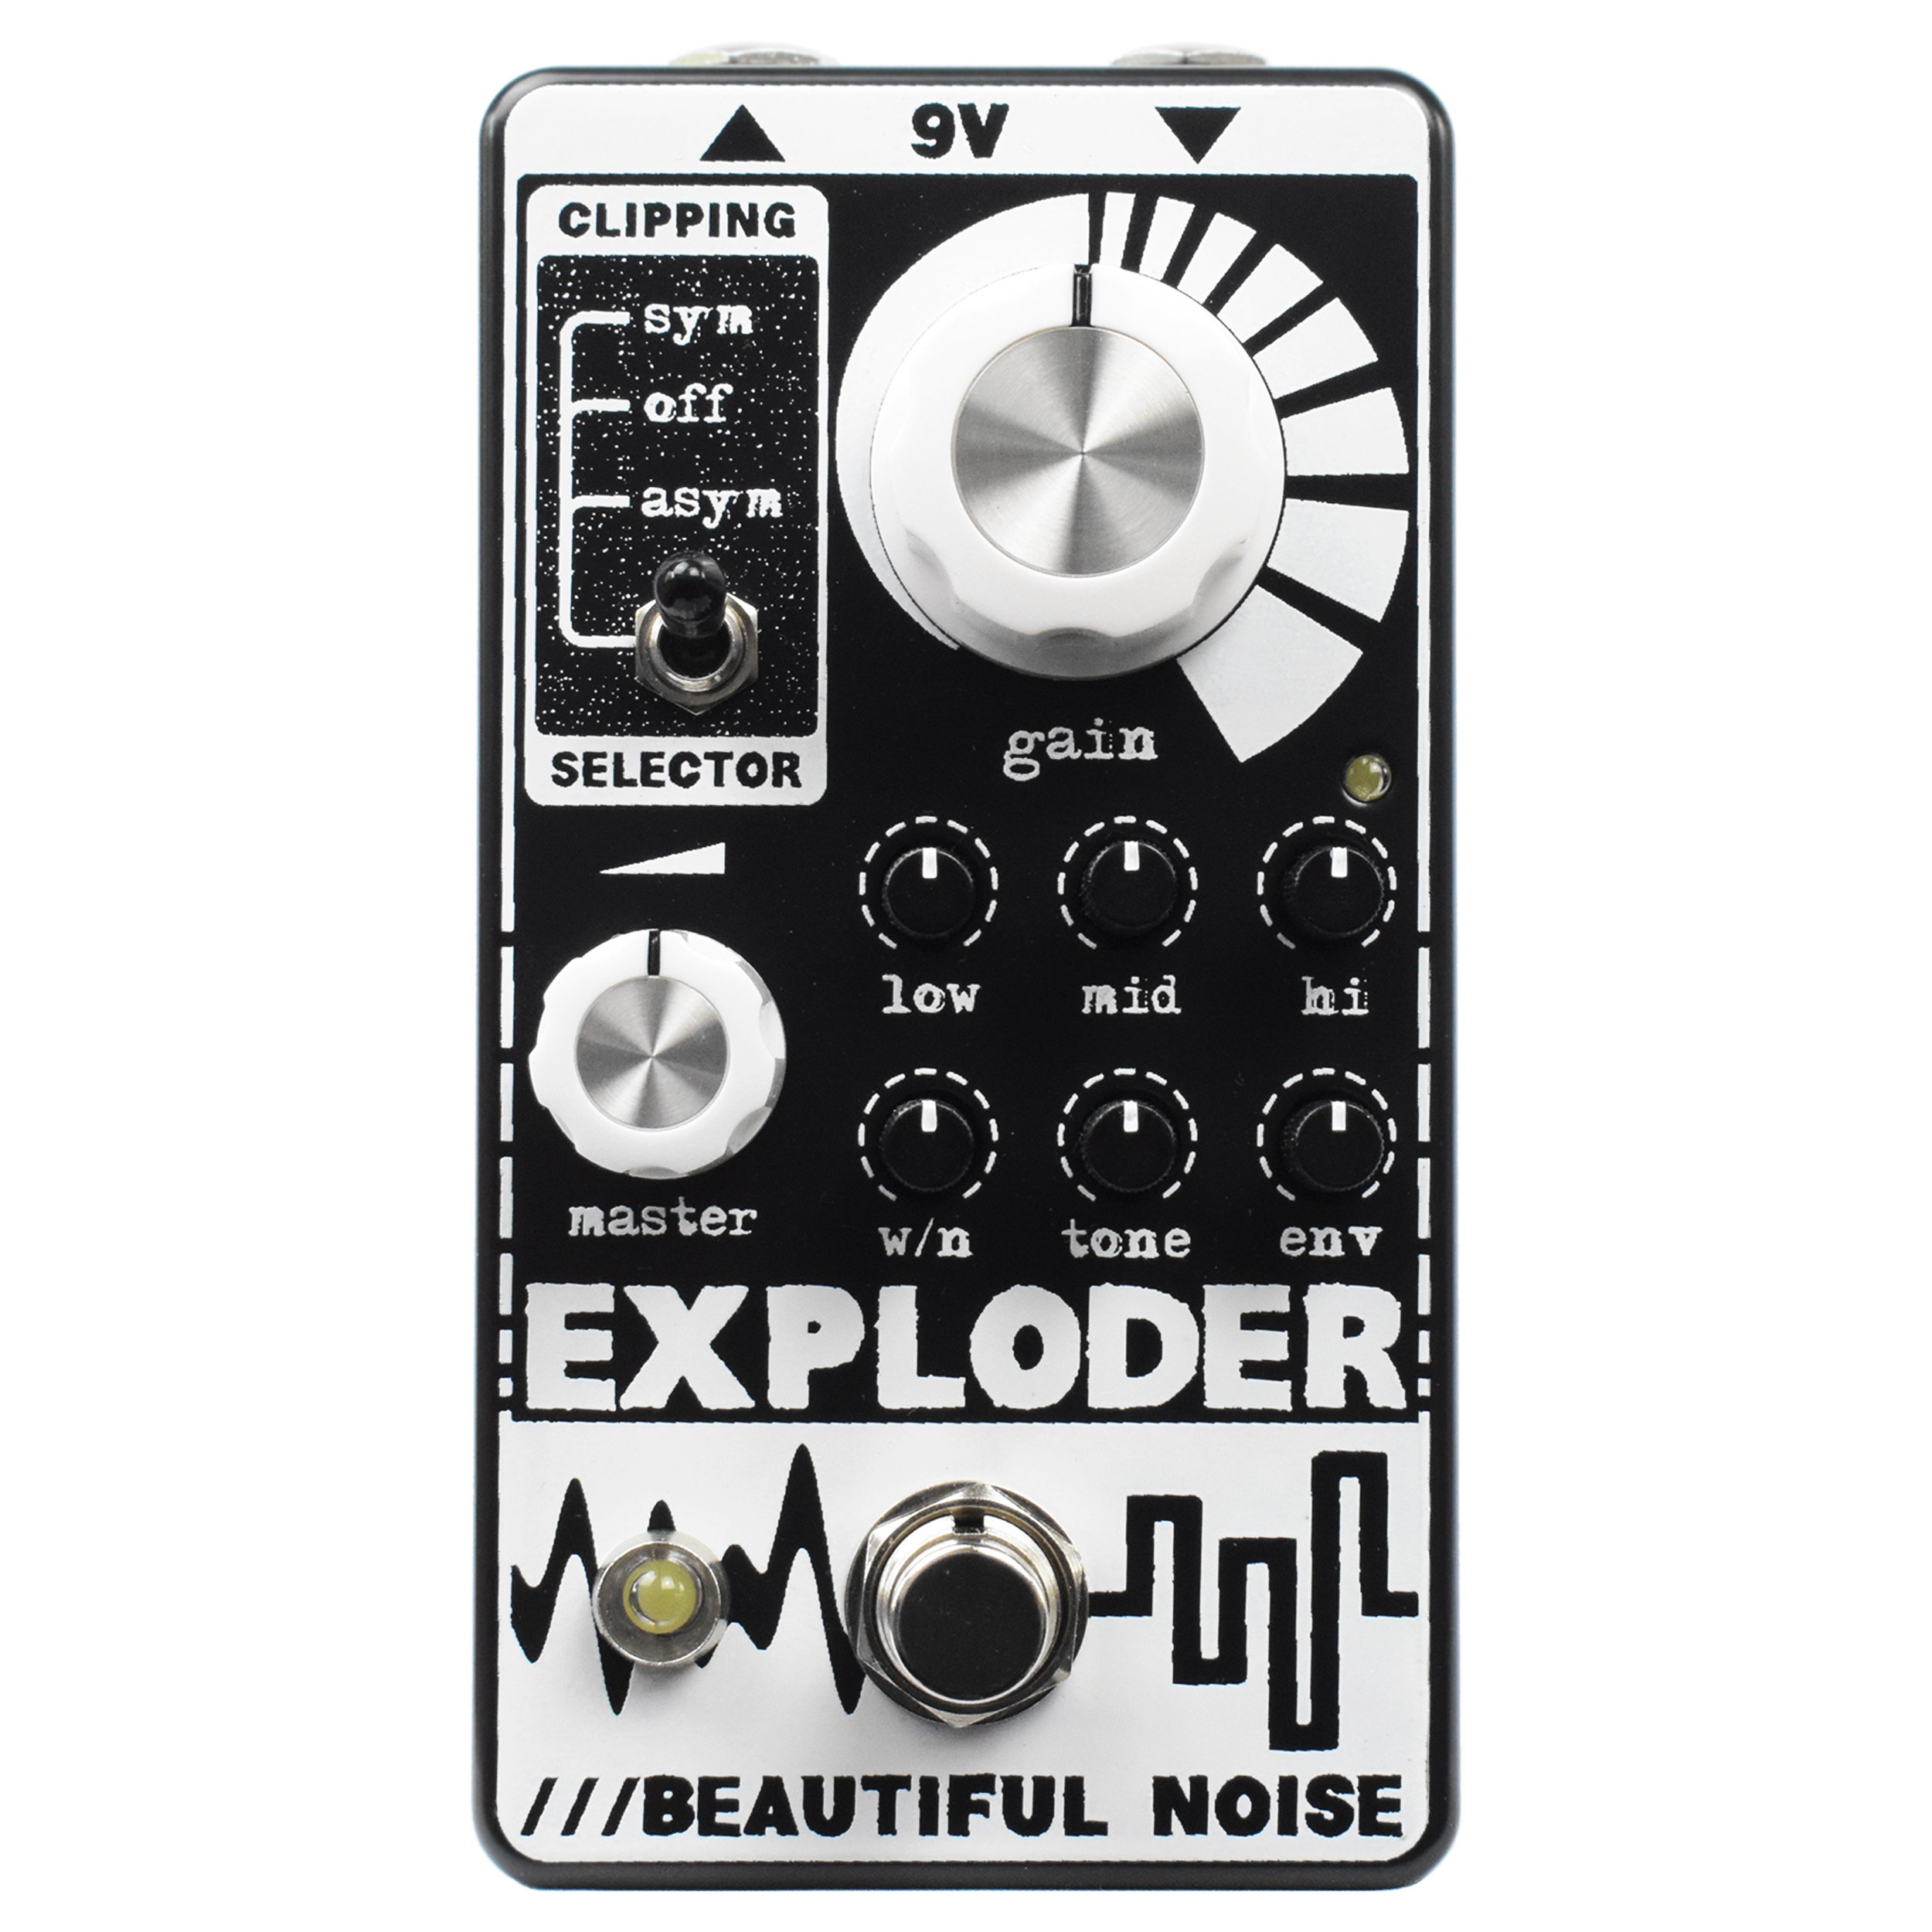 EXPLODER — BEAUTIFUL NOISE EFFECTS